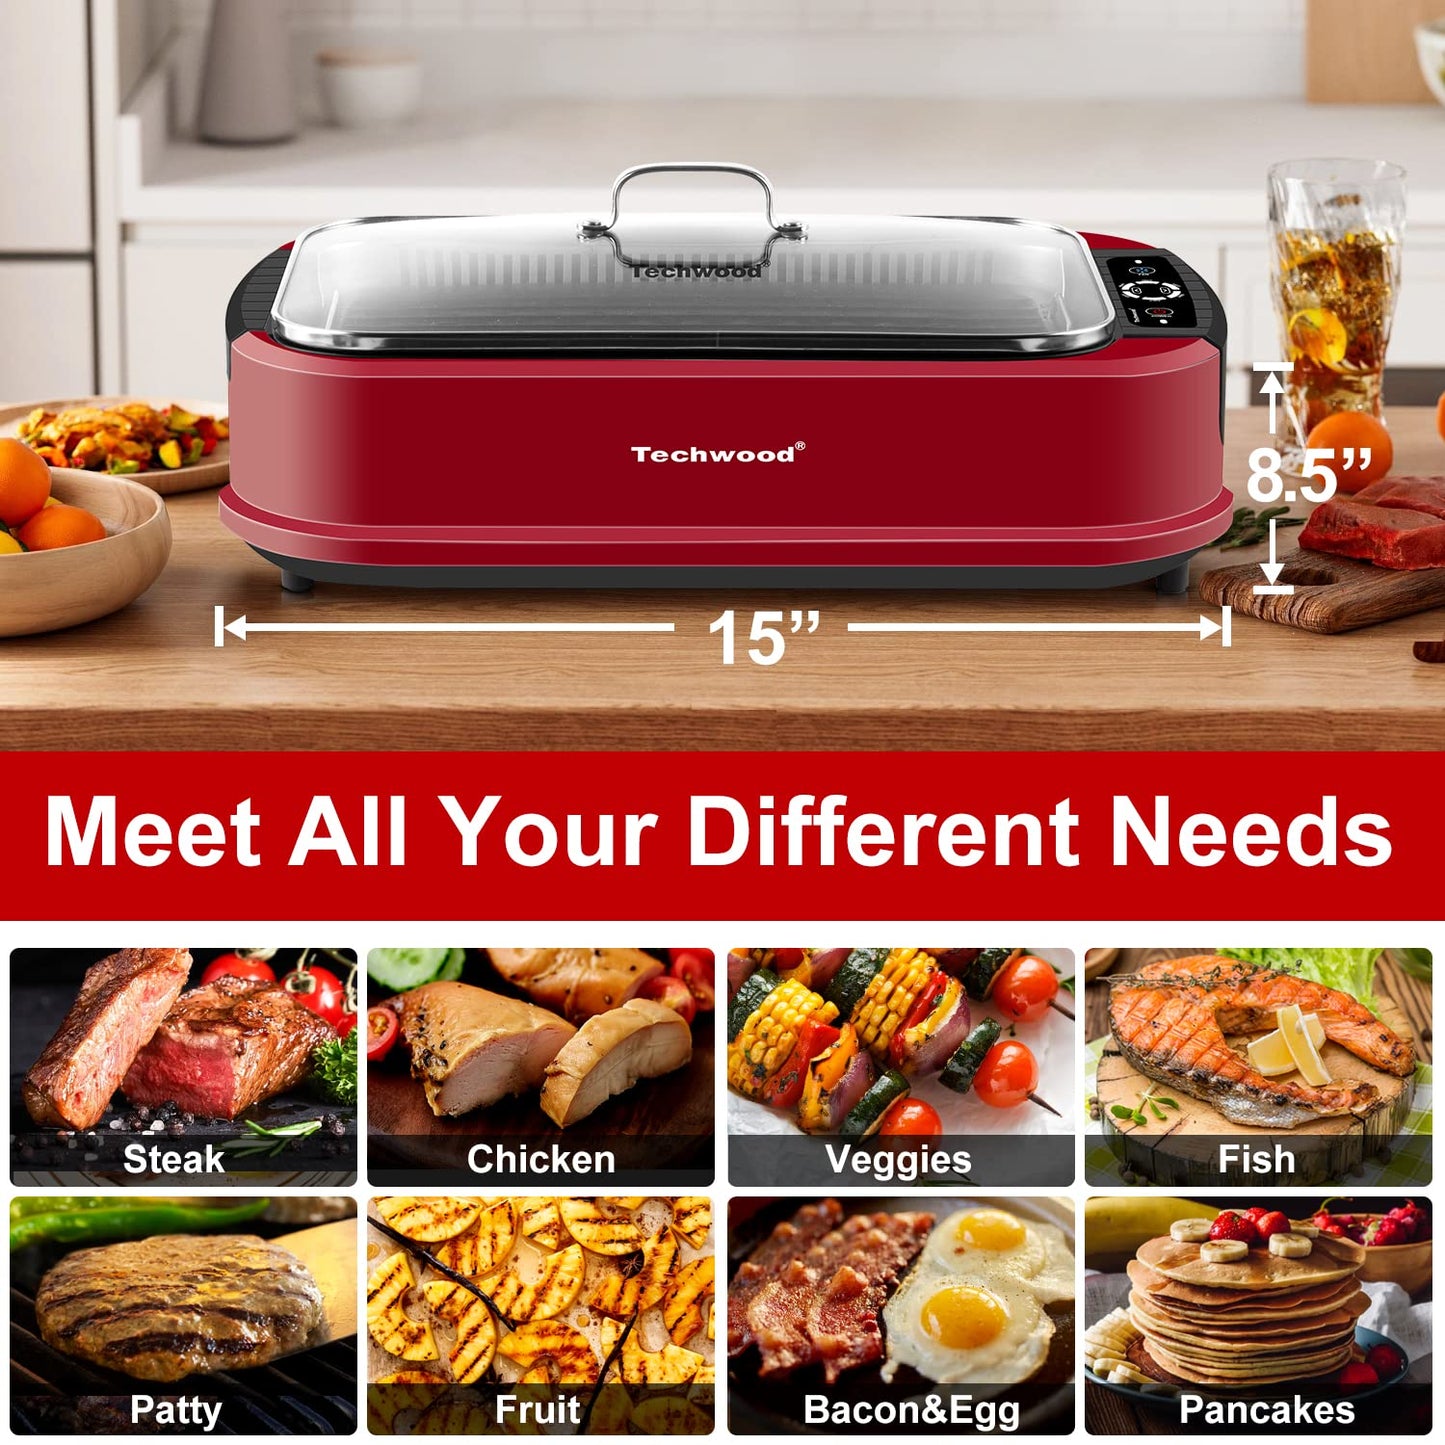 Techwood 1500W Electric Indoor Grill with Tempered Glass Lid, Compact & Portable Non-stick BBQ Grill, Turbo Smoke Extractor Technology, Drip Tray& Double Removable Plate, Red